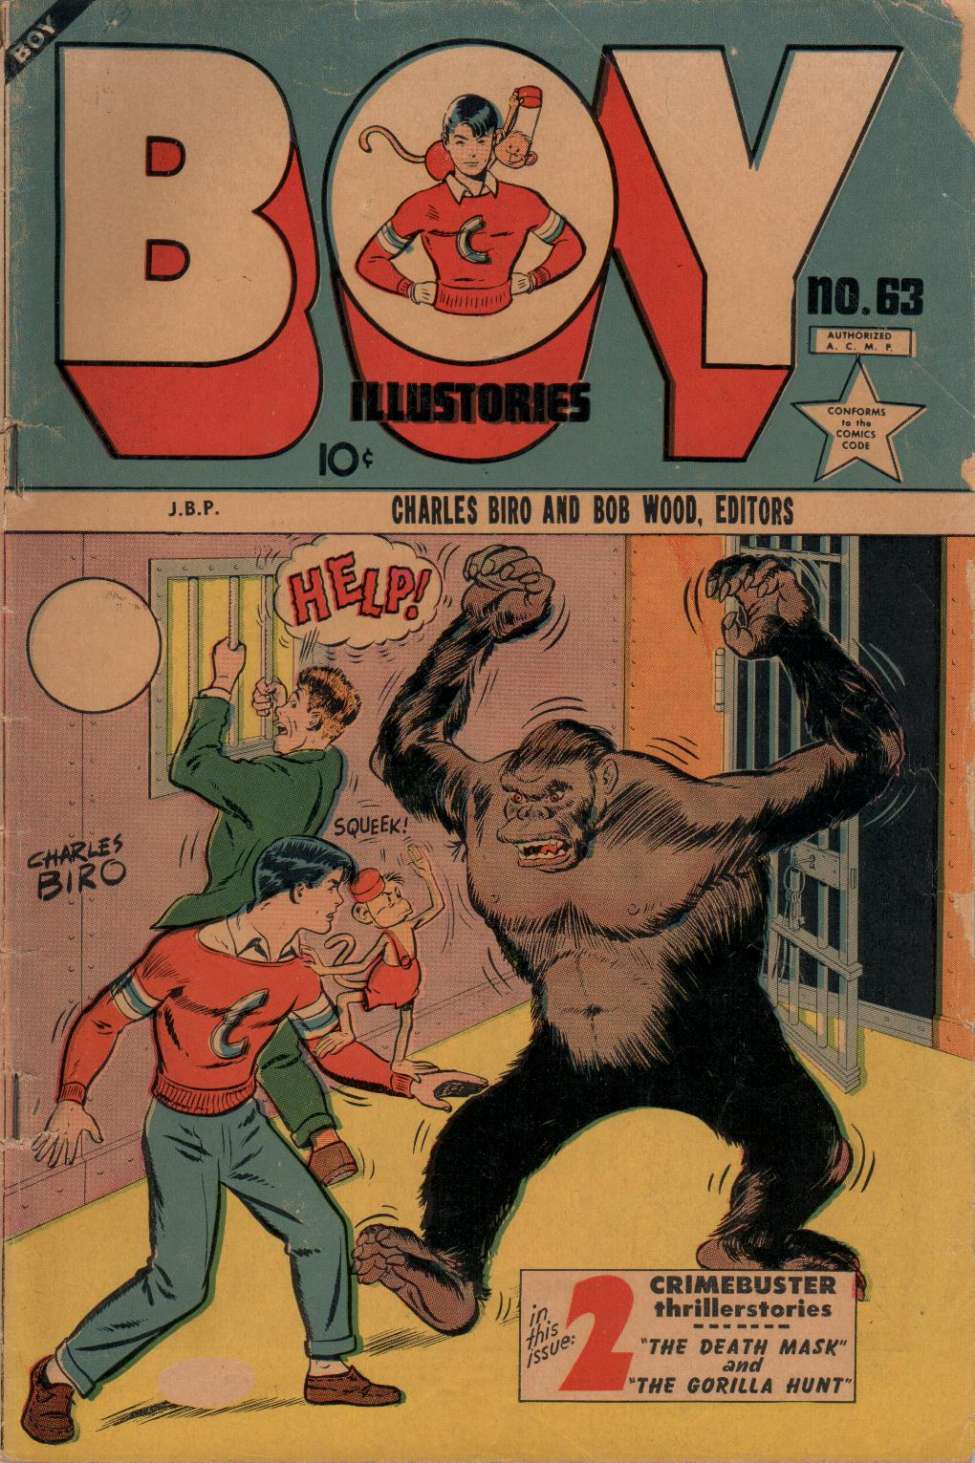 Comic Book Cover For Boy Illustories 63